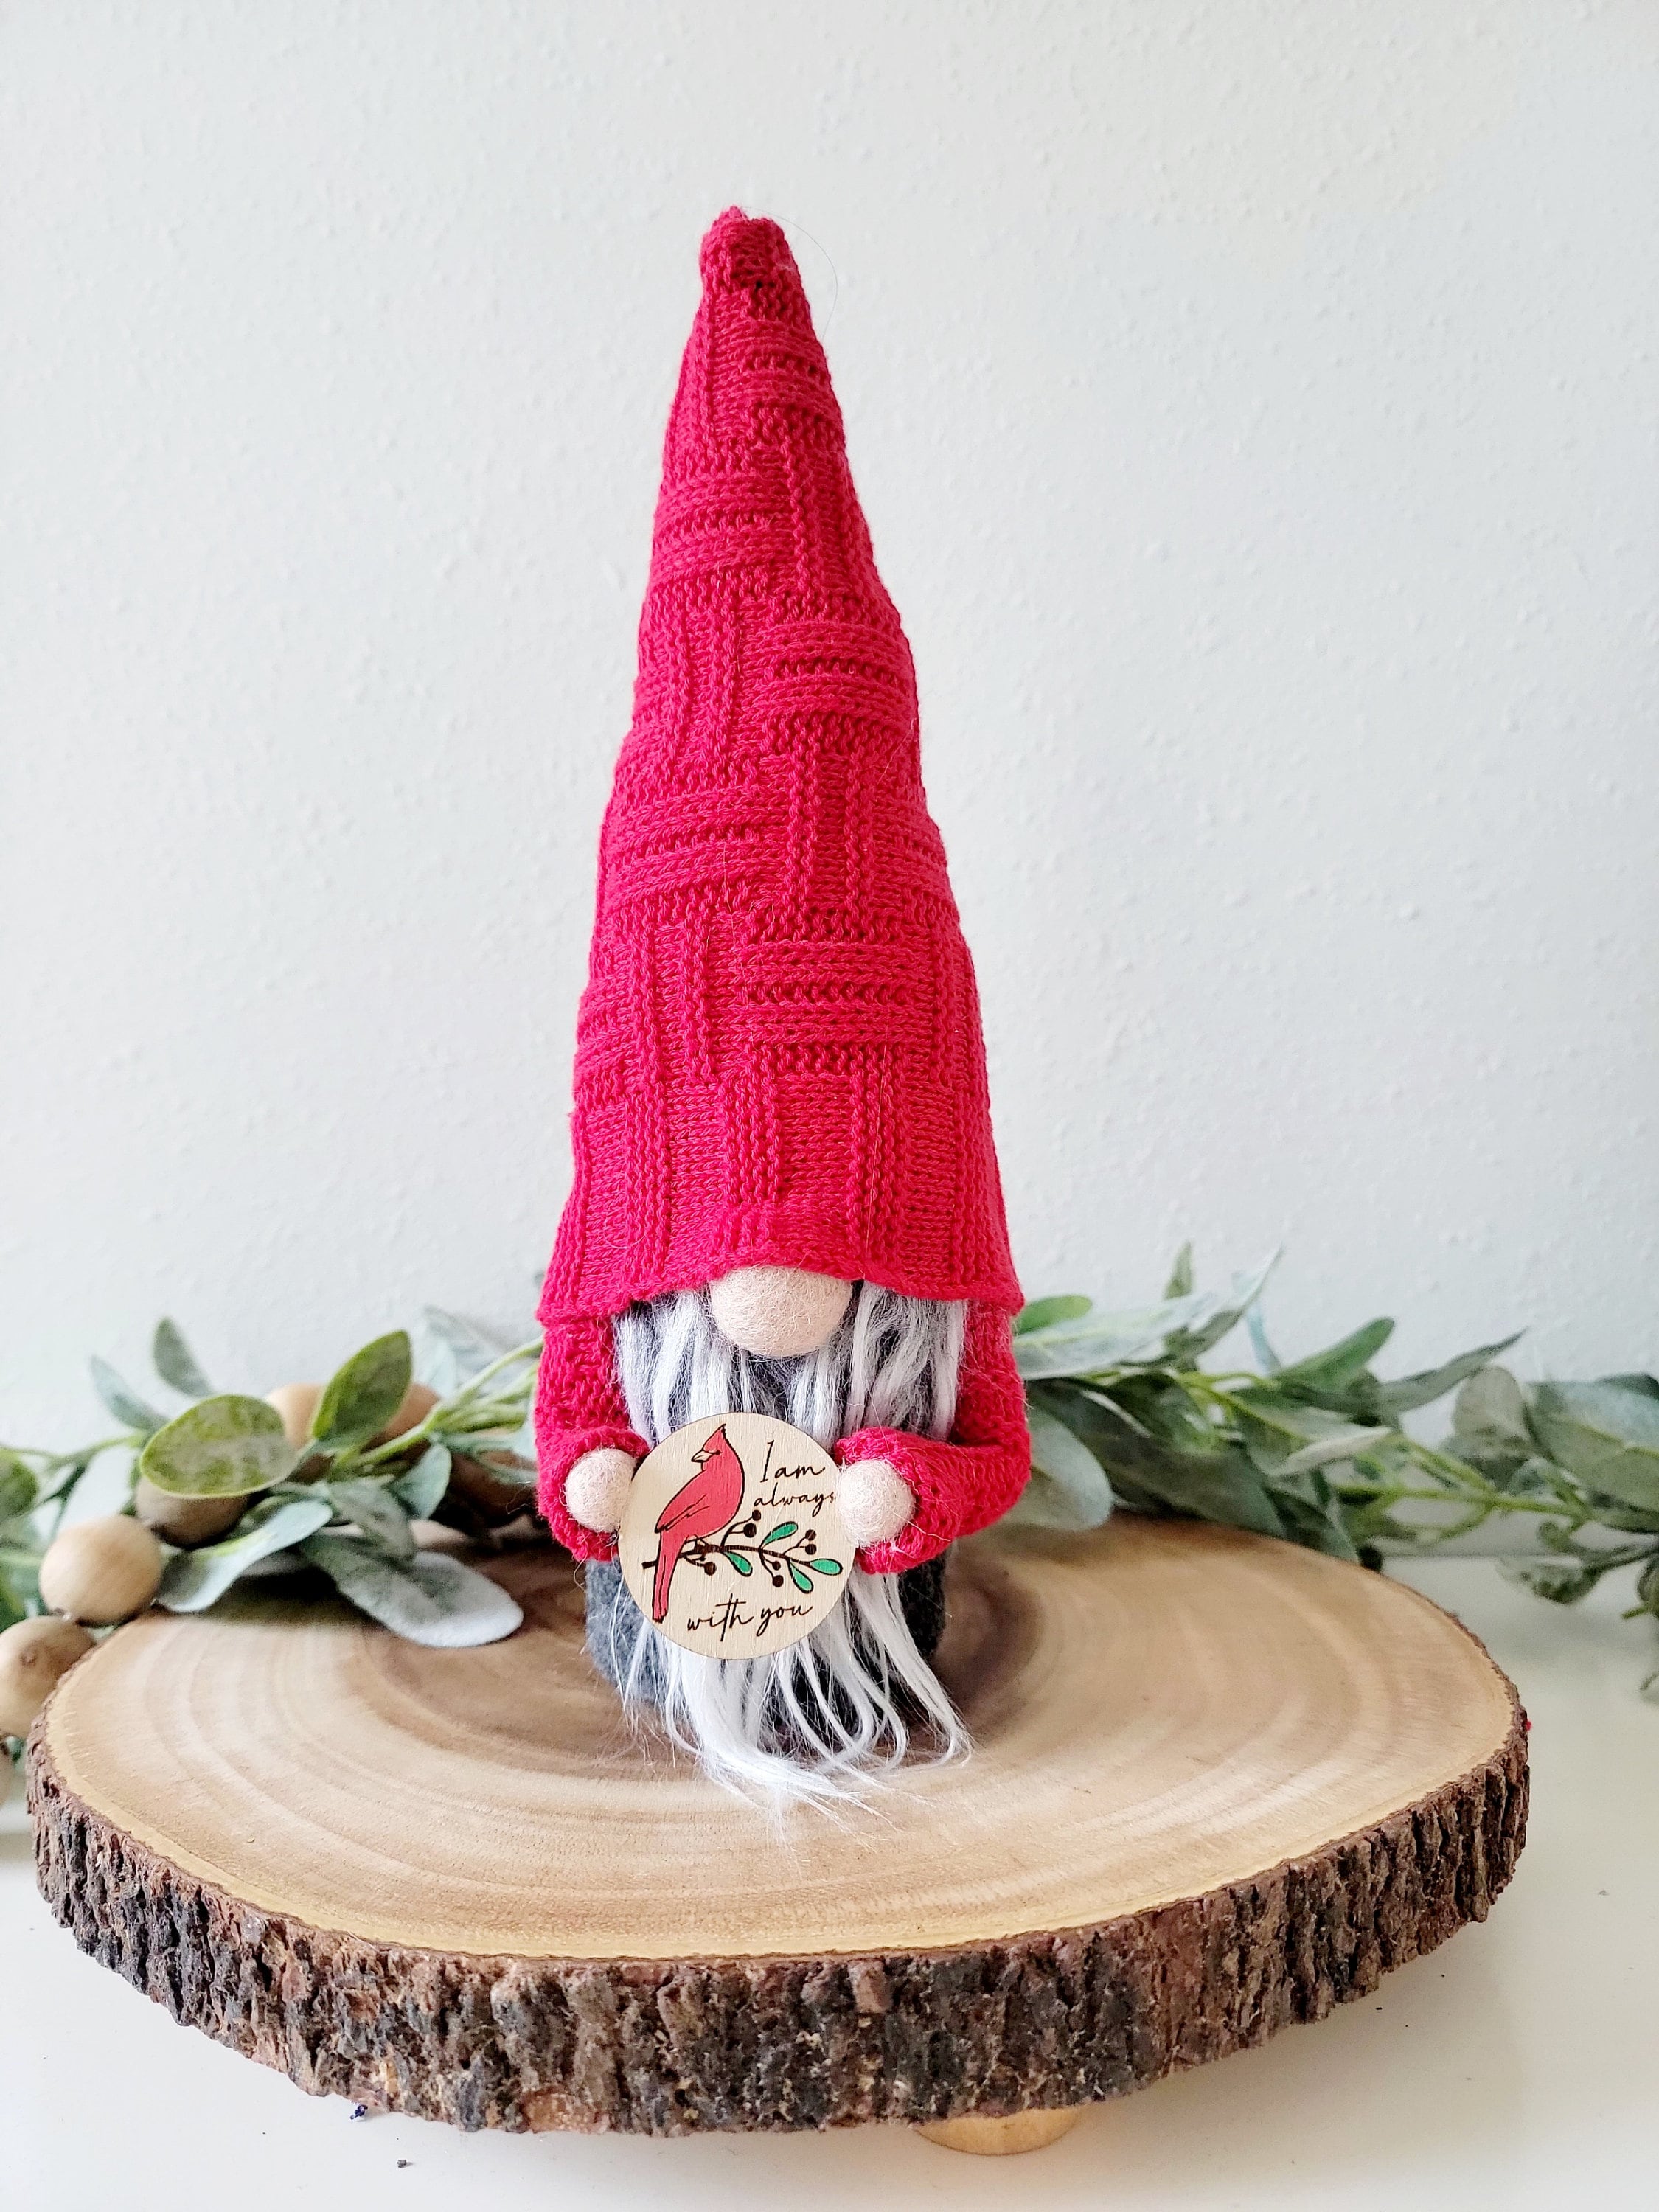 Upltowtme Cardinal Gnomes Gifts Red Bird Tomte Decor Farmhouse Nordic Dwarf  Home I Am Always with You Table Centerpieces Decoration Mother's Day